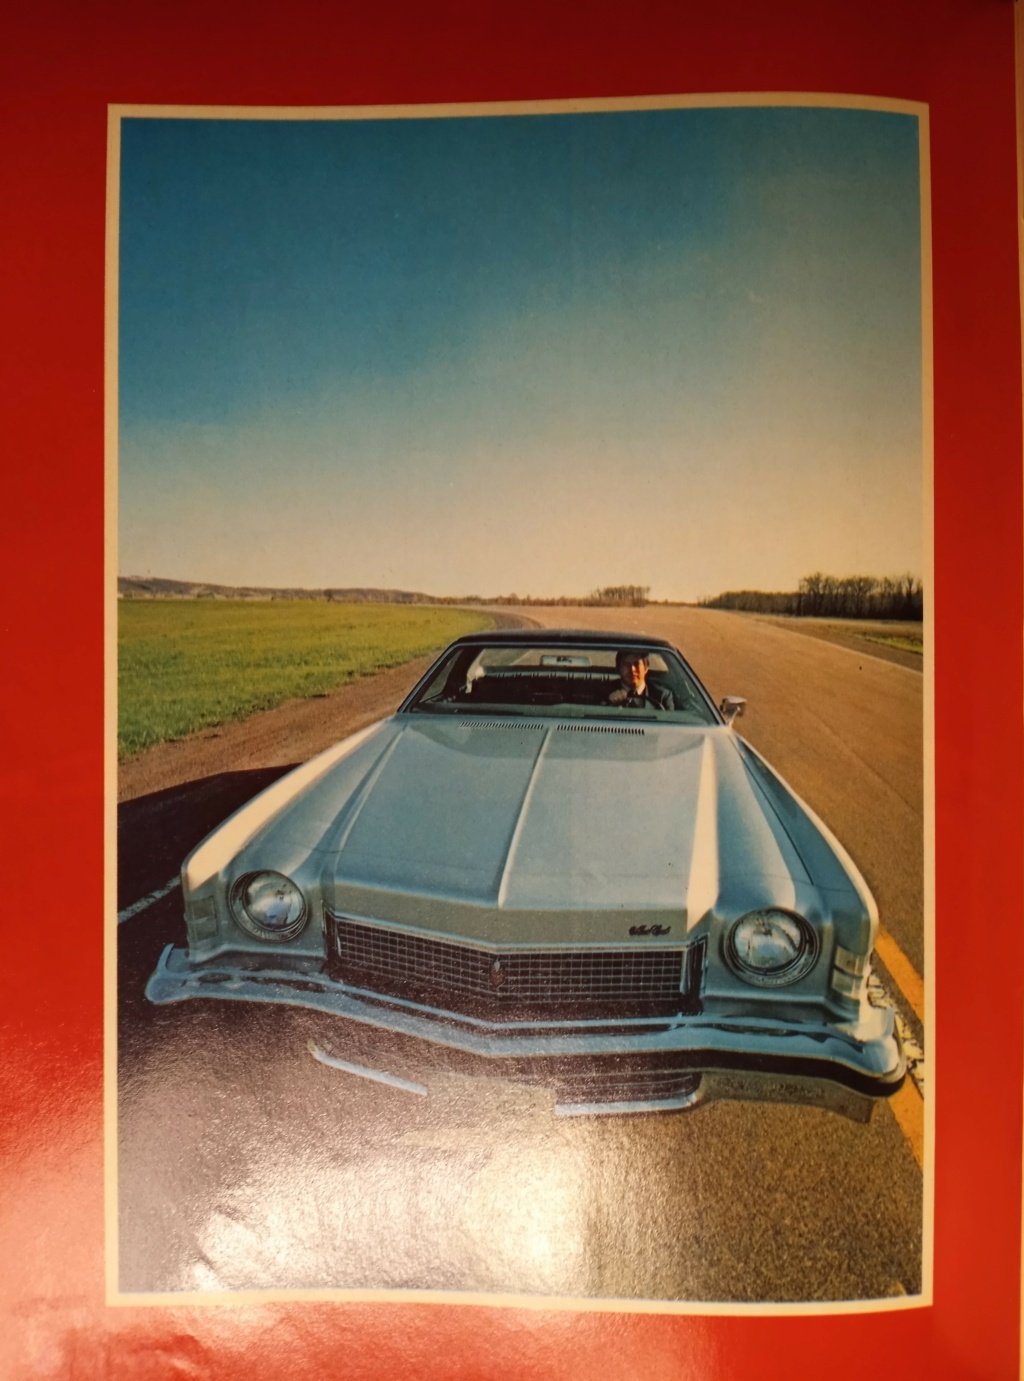 MOTOR TREND CAR OF THE YEAR-------1973 MONTE CARLO Cnd_se14